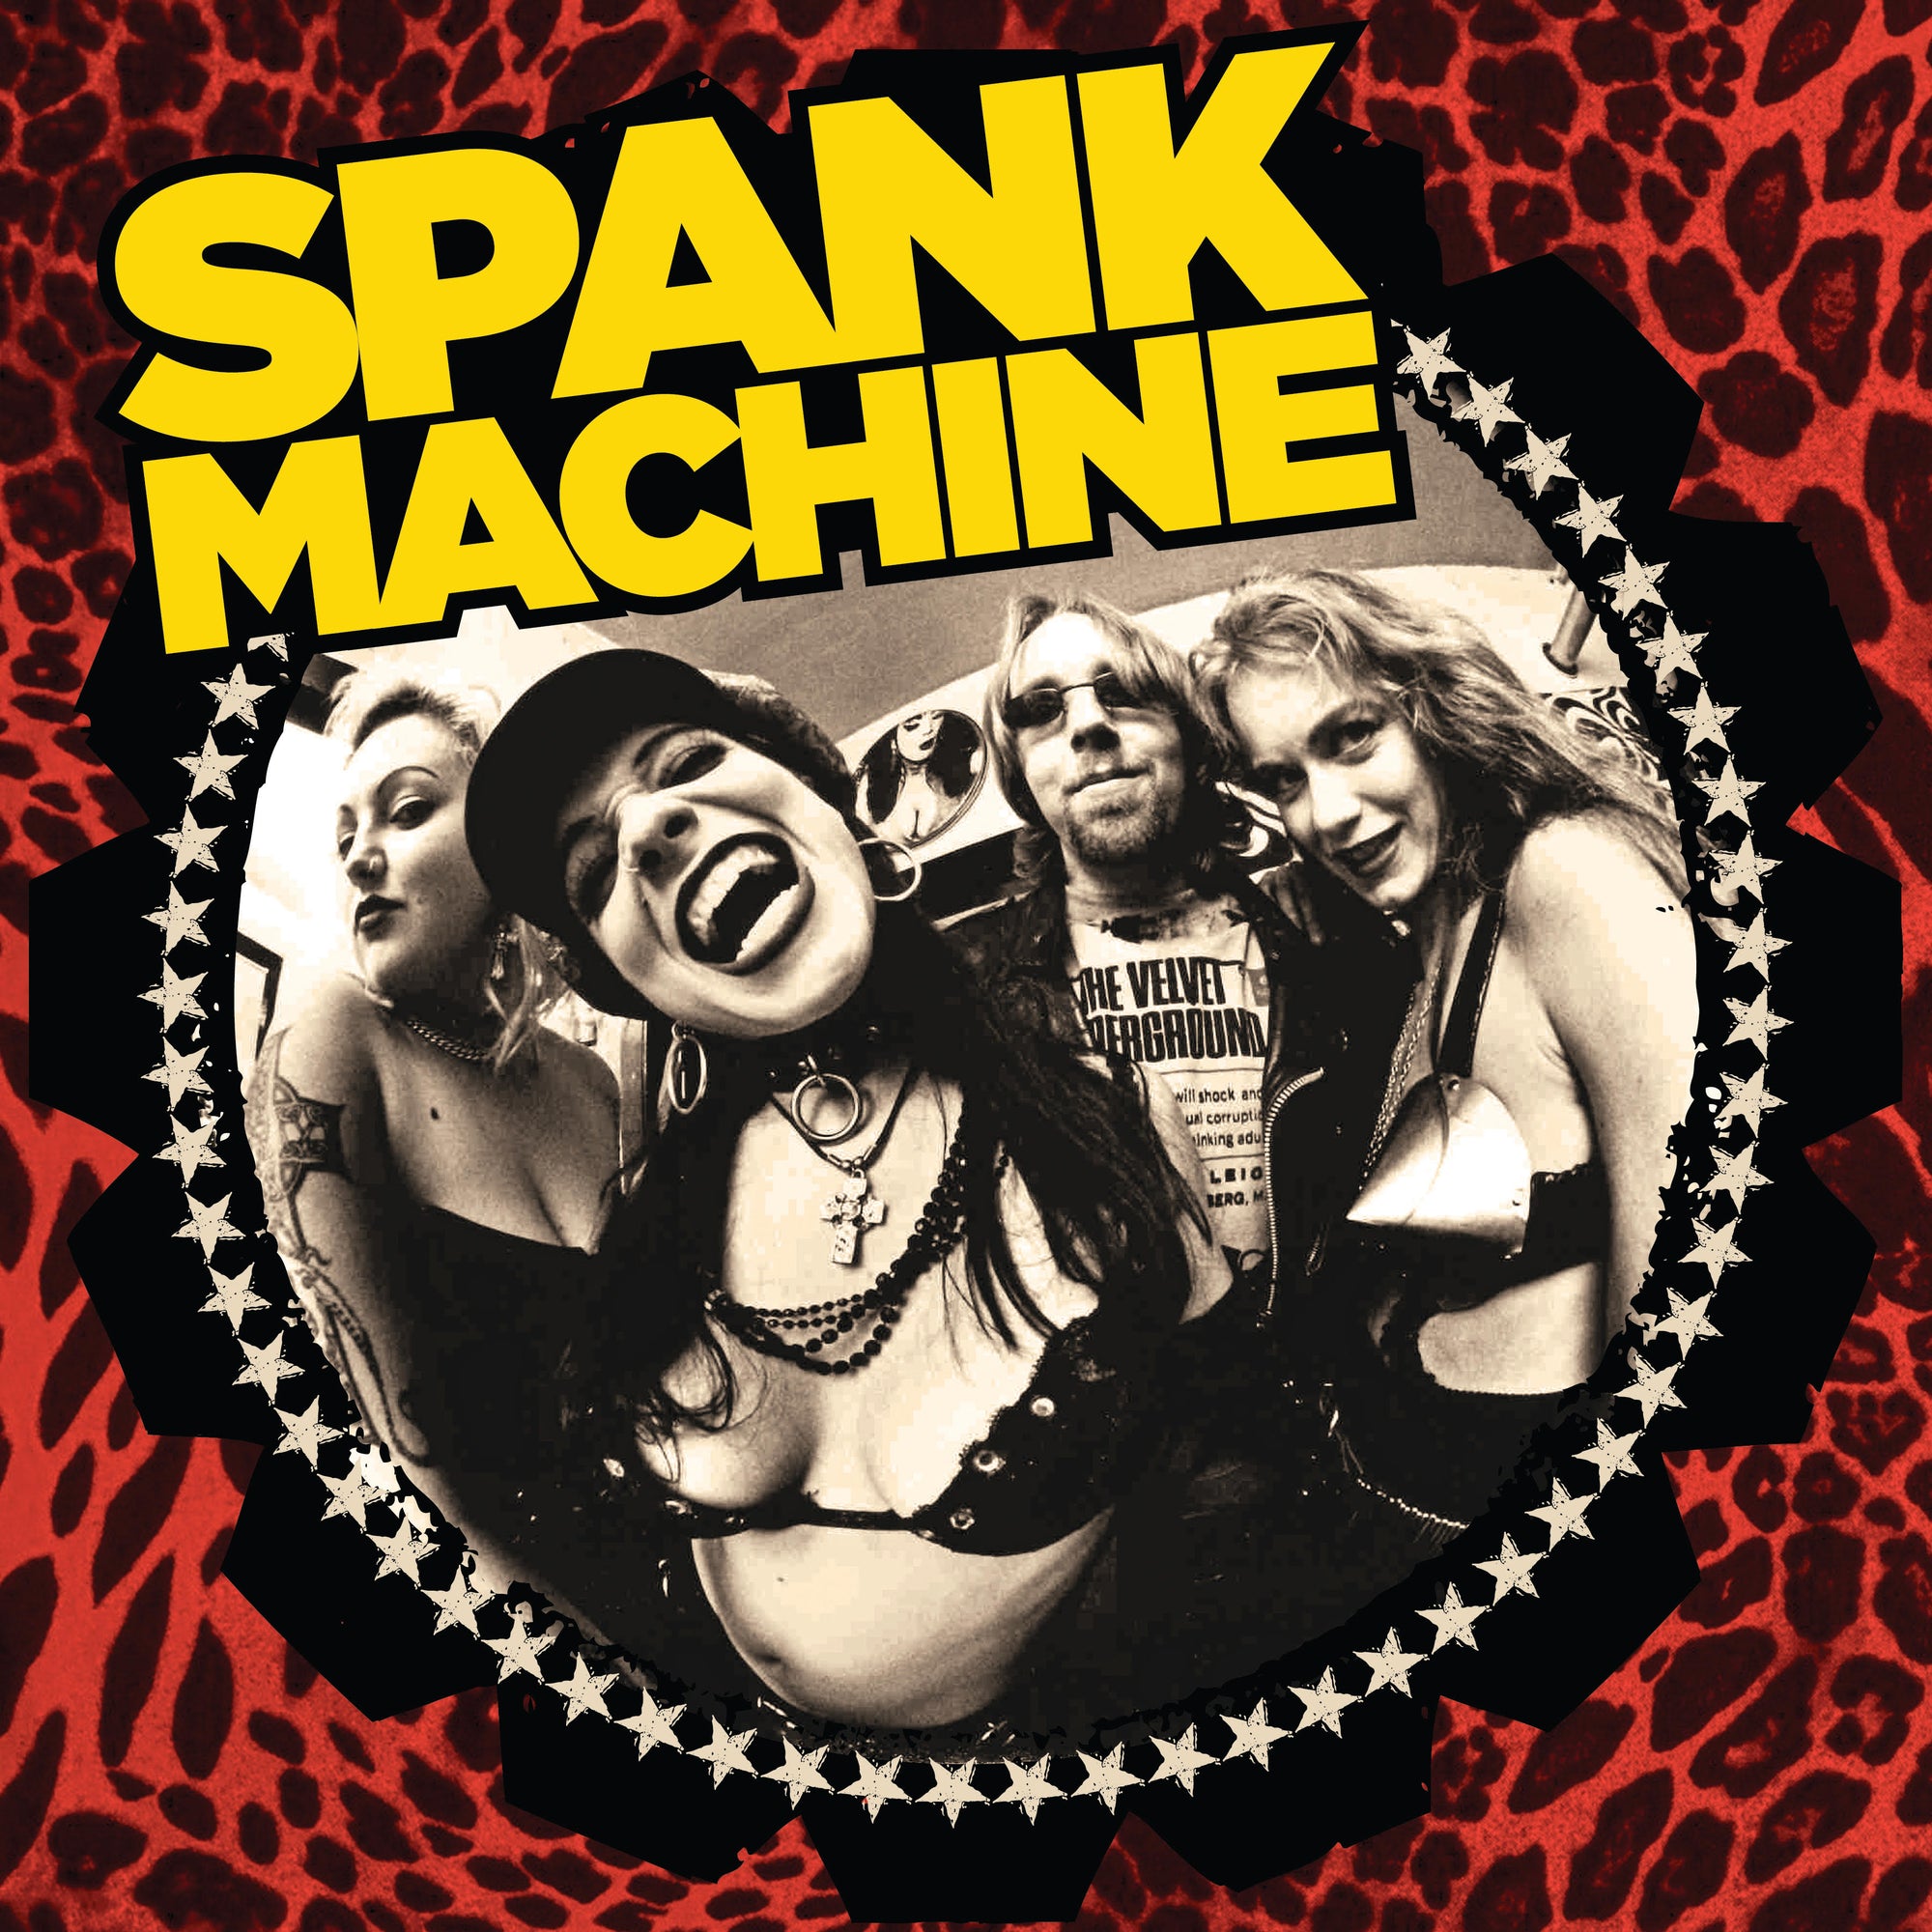 NEW SPANK MACHINE DIGITAL LP "SPANK YOU VERY MUCH" OUT NOW